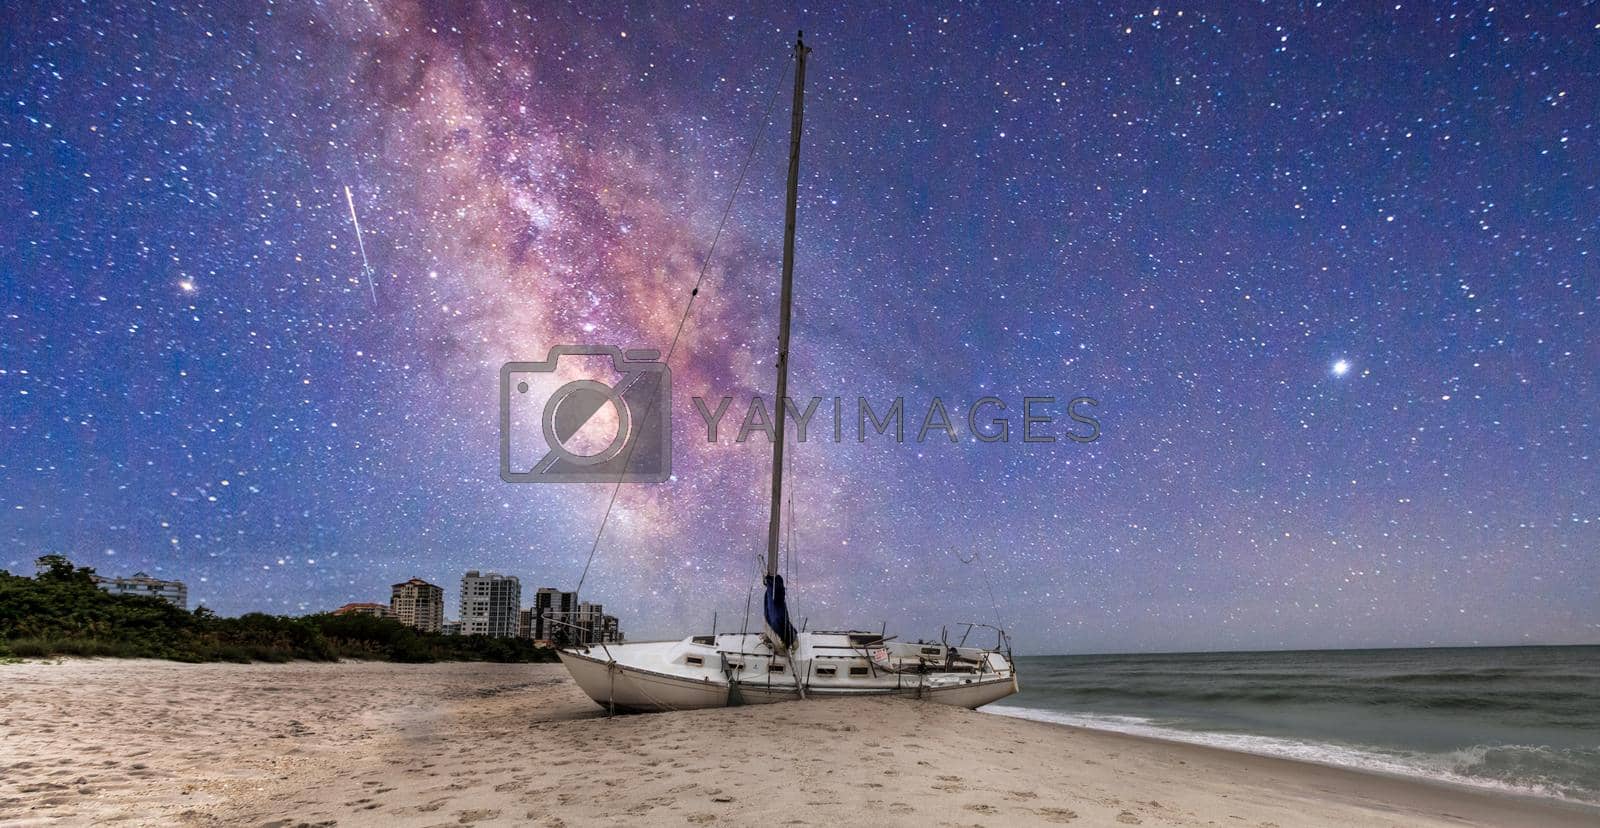 Royalty free image of Milky way in the night sky over a shipwreck off the coast of Clam Pass by steffstarr